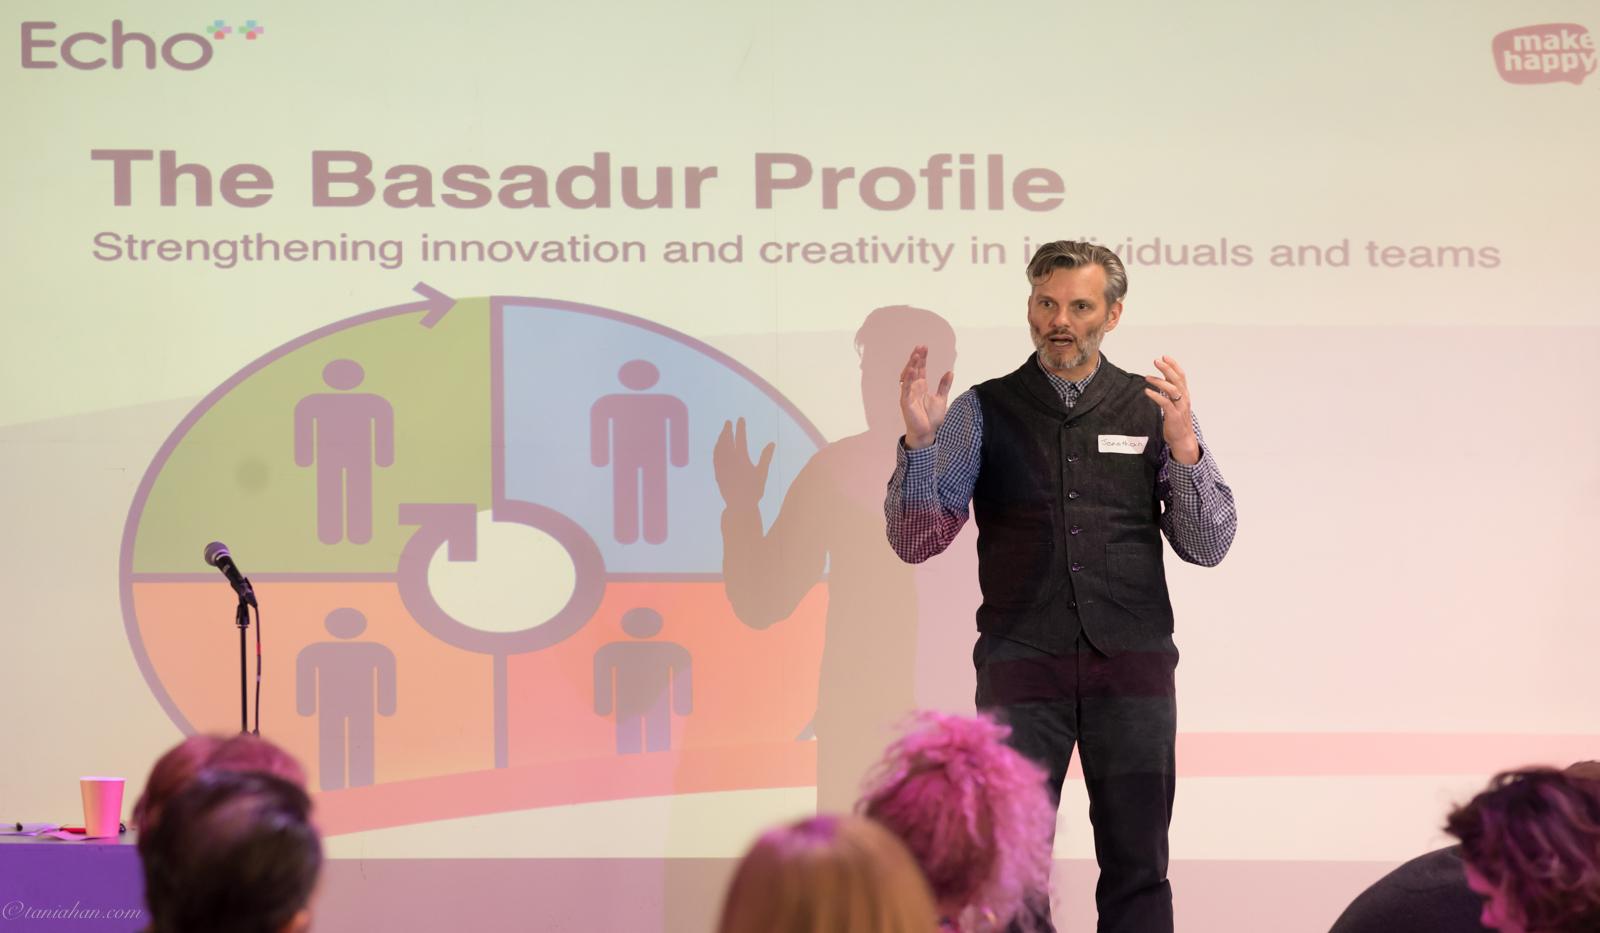 Using the Basadur Profile to understand and enhance your team dynamic